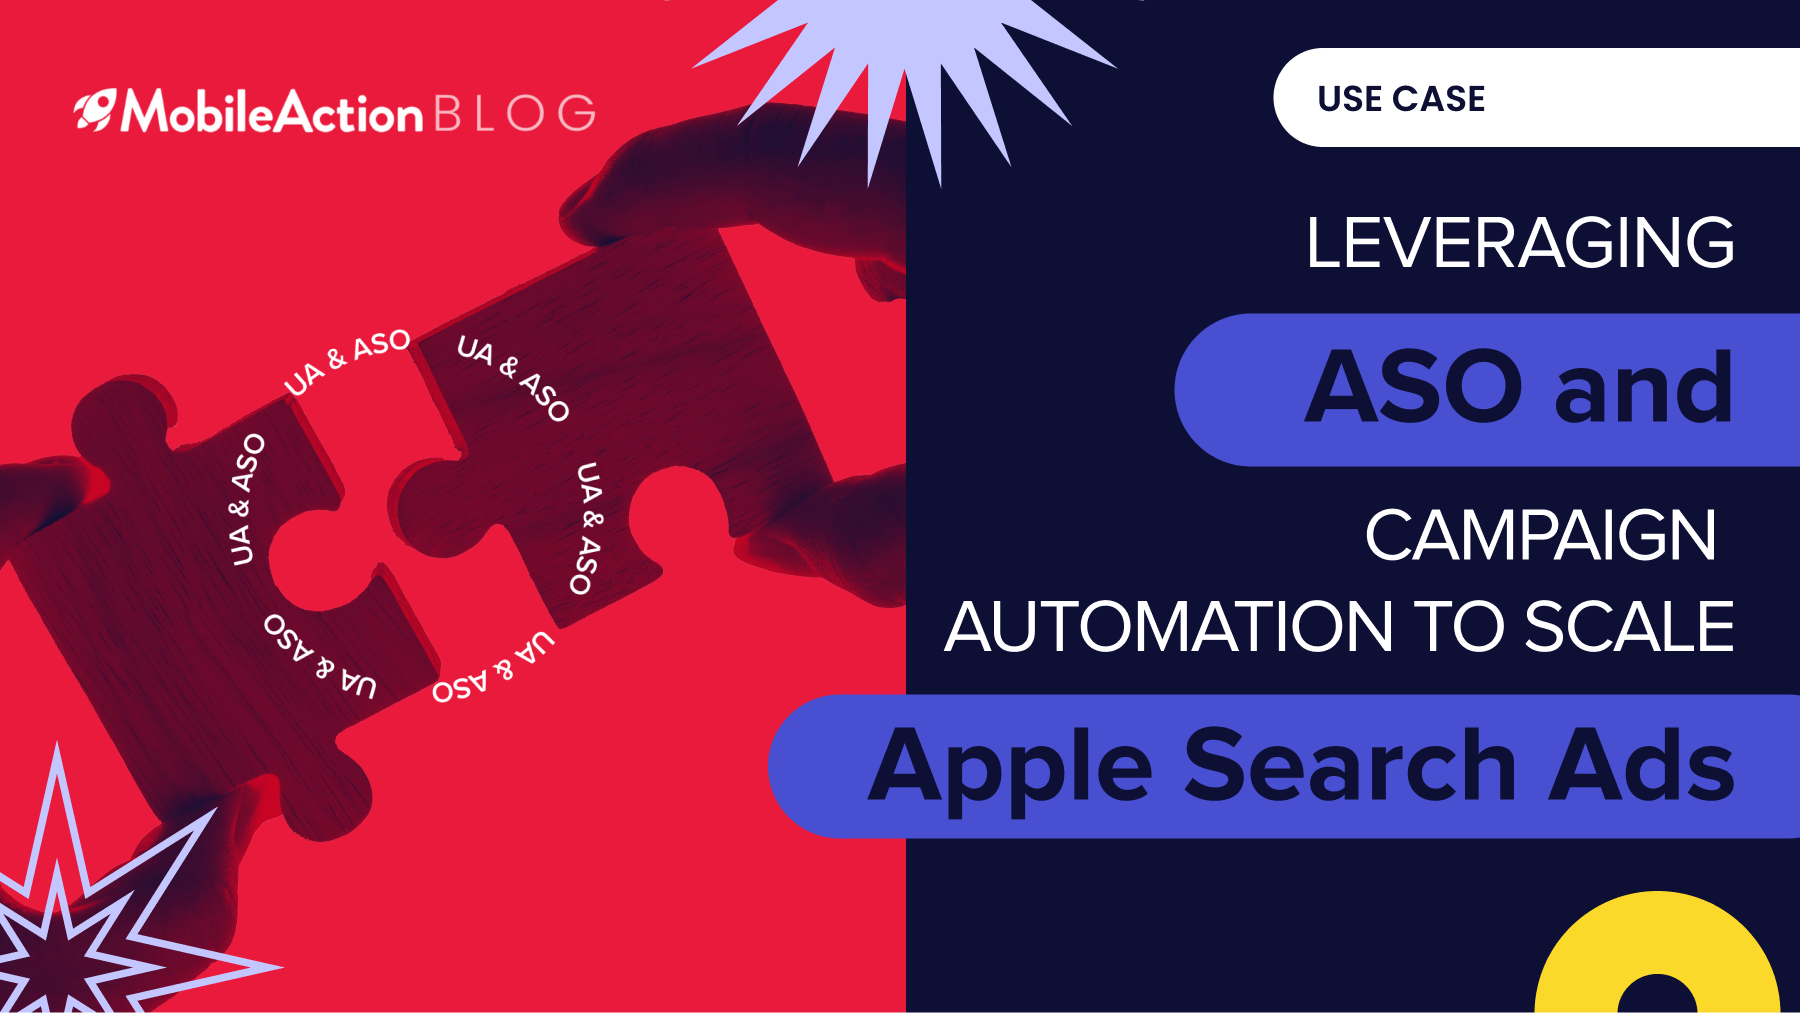 ASO and Apple Search Ads